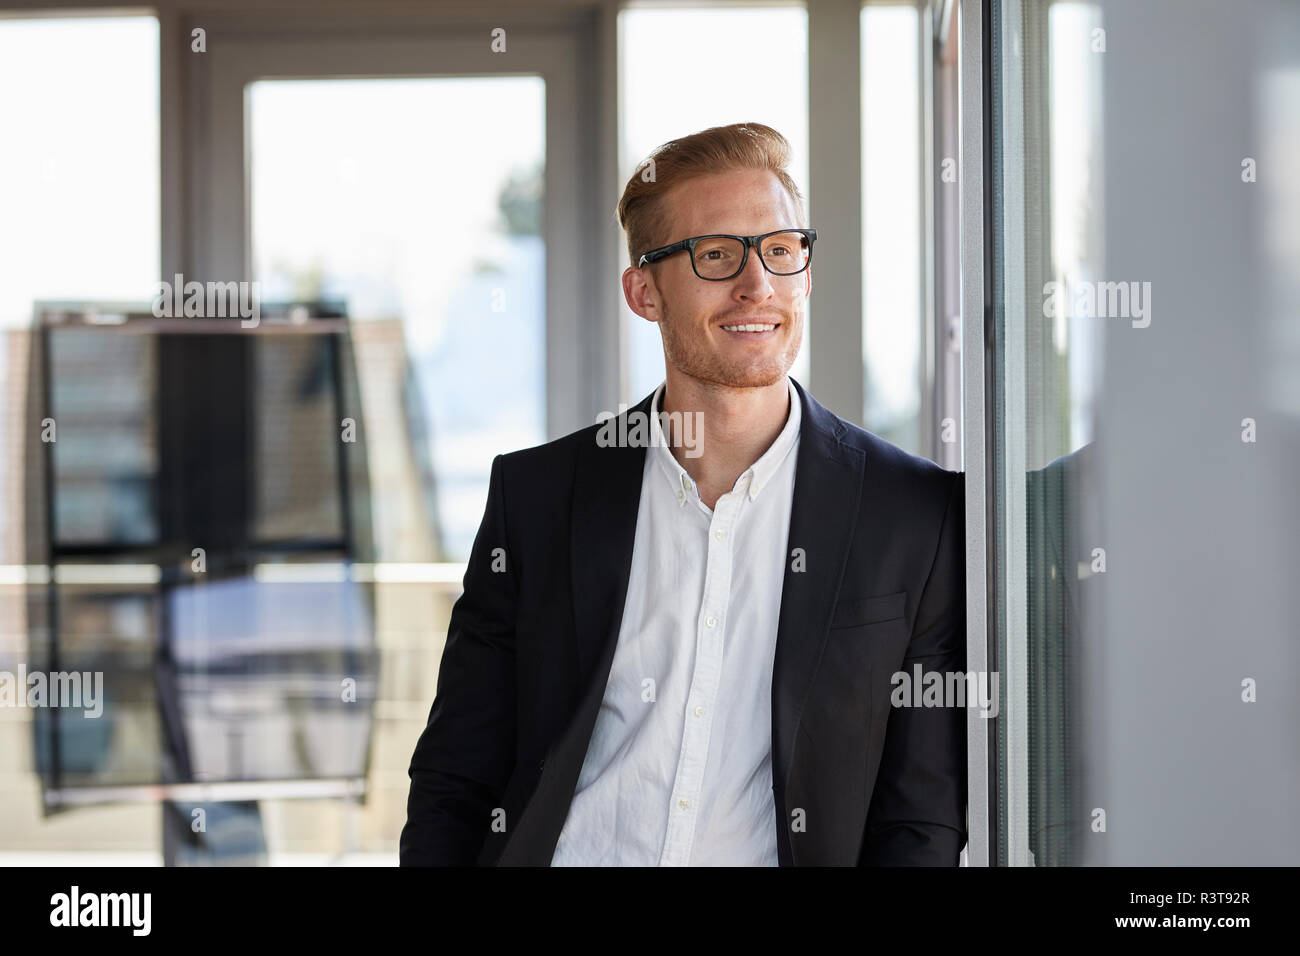 Smiling businessman in office looking out of window Banque D'Images